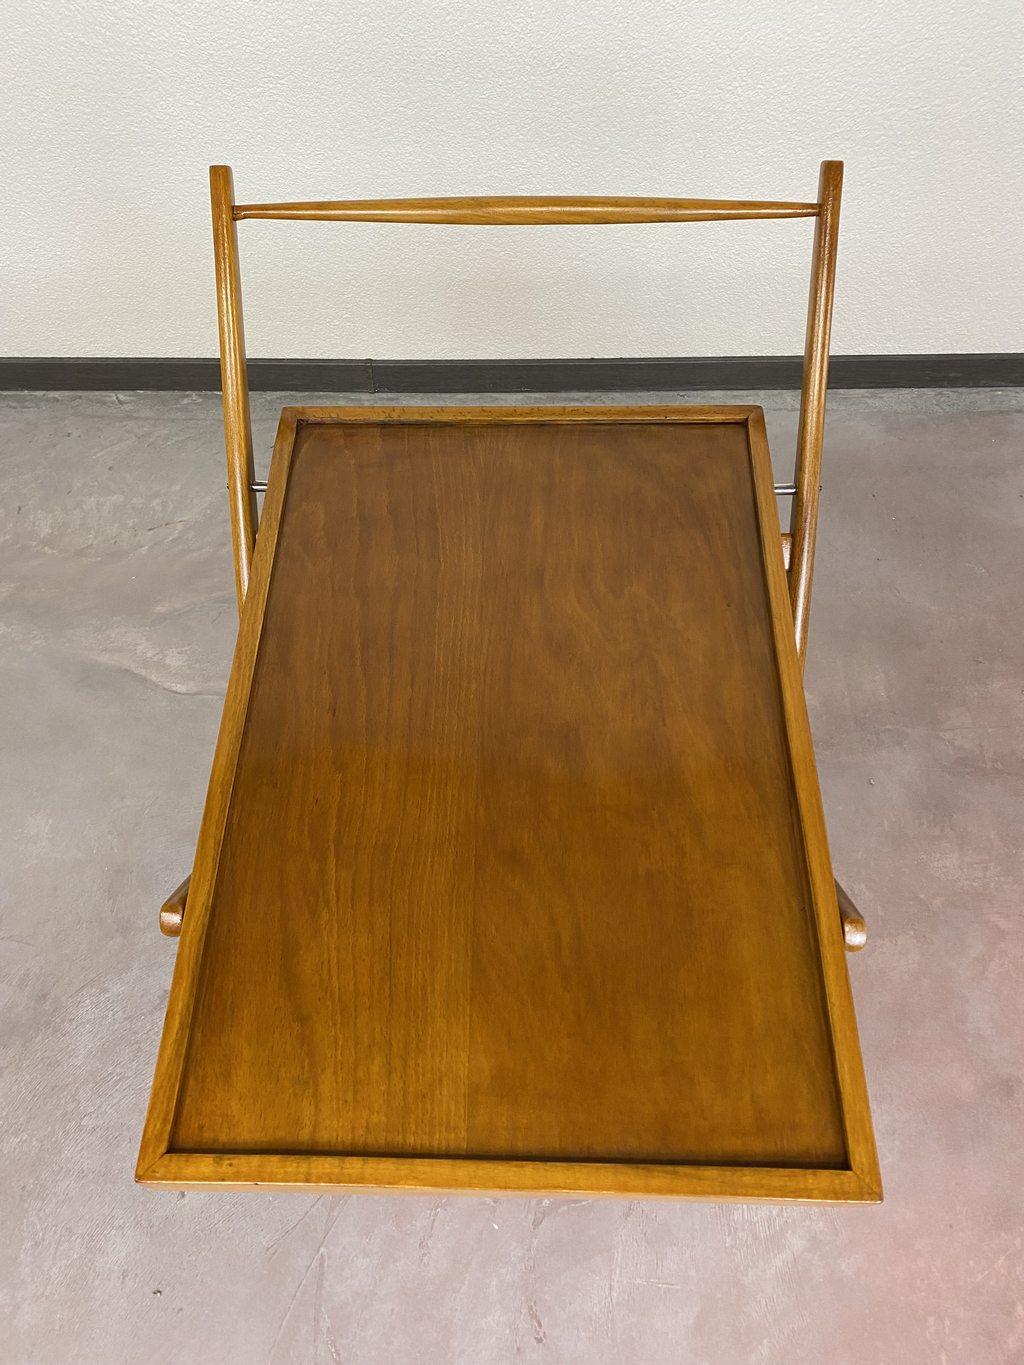 Functionalist Folding Trolley by Thonet For Sale 2